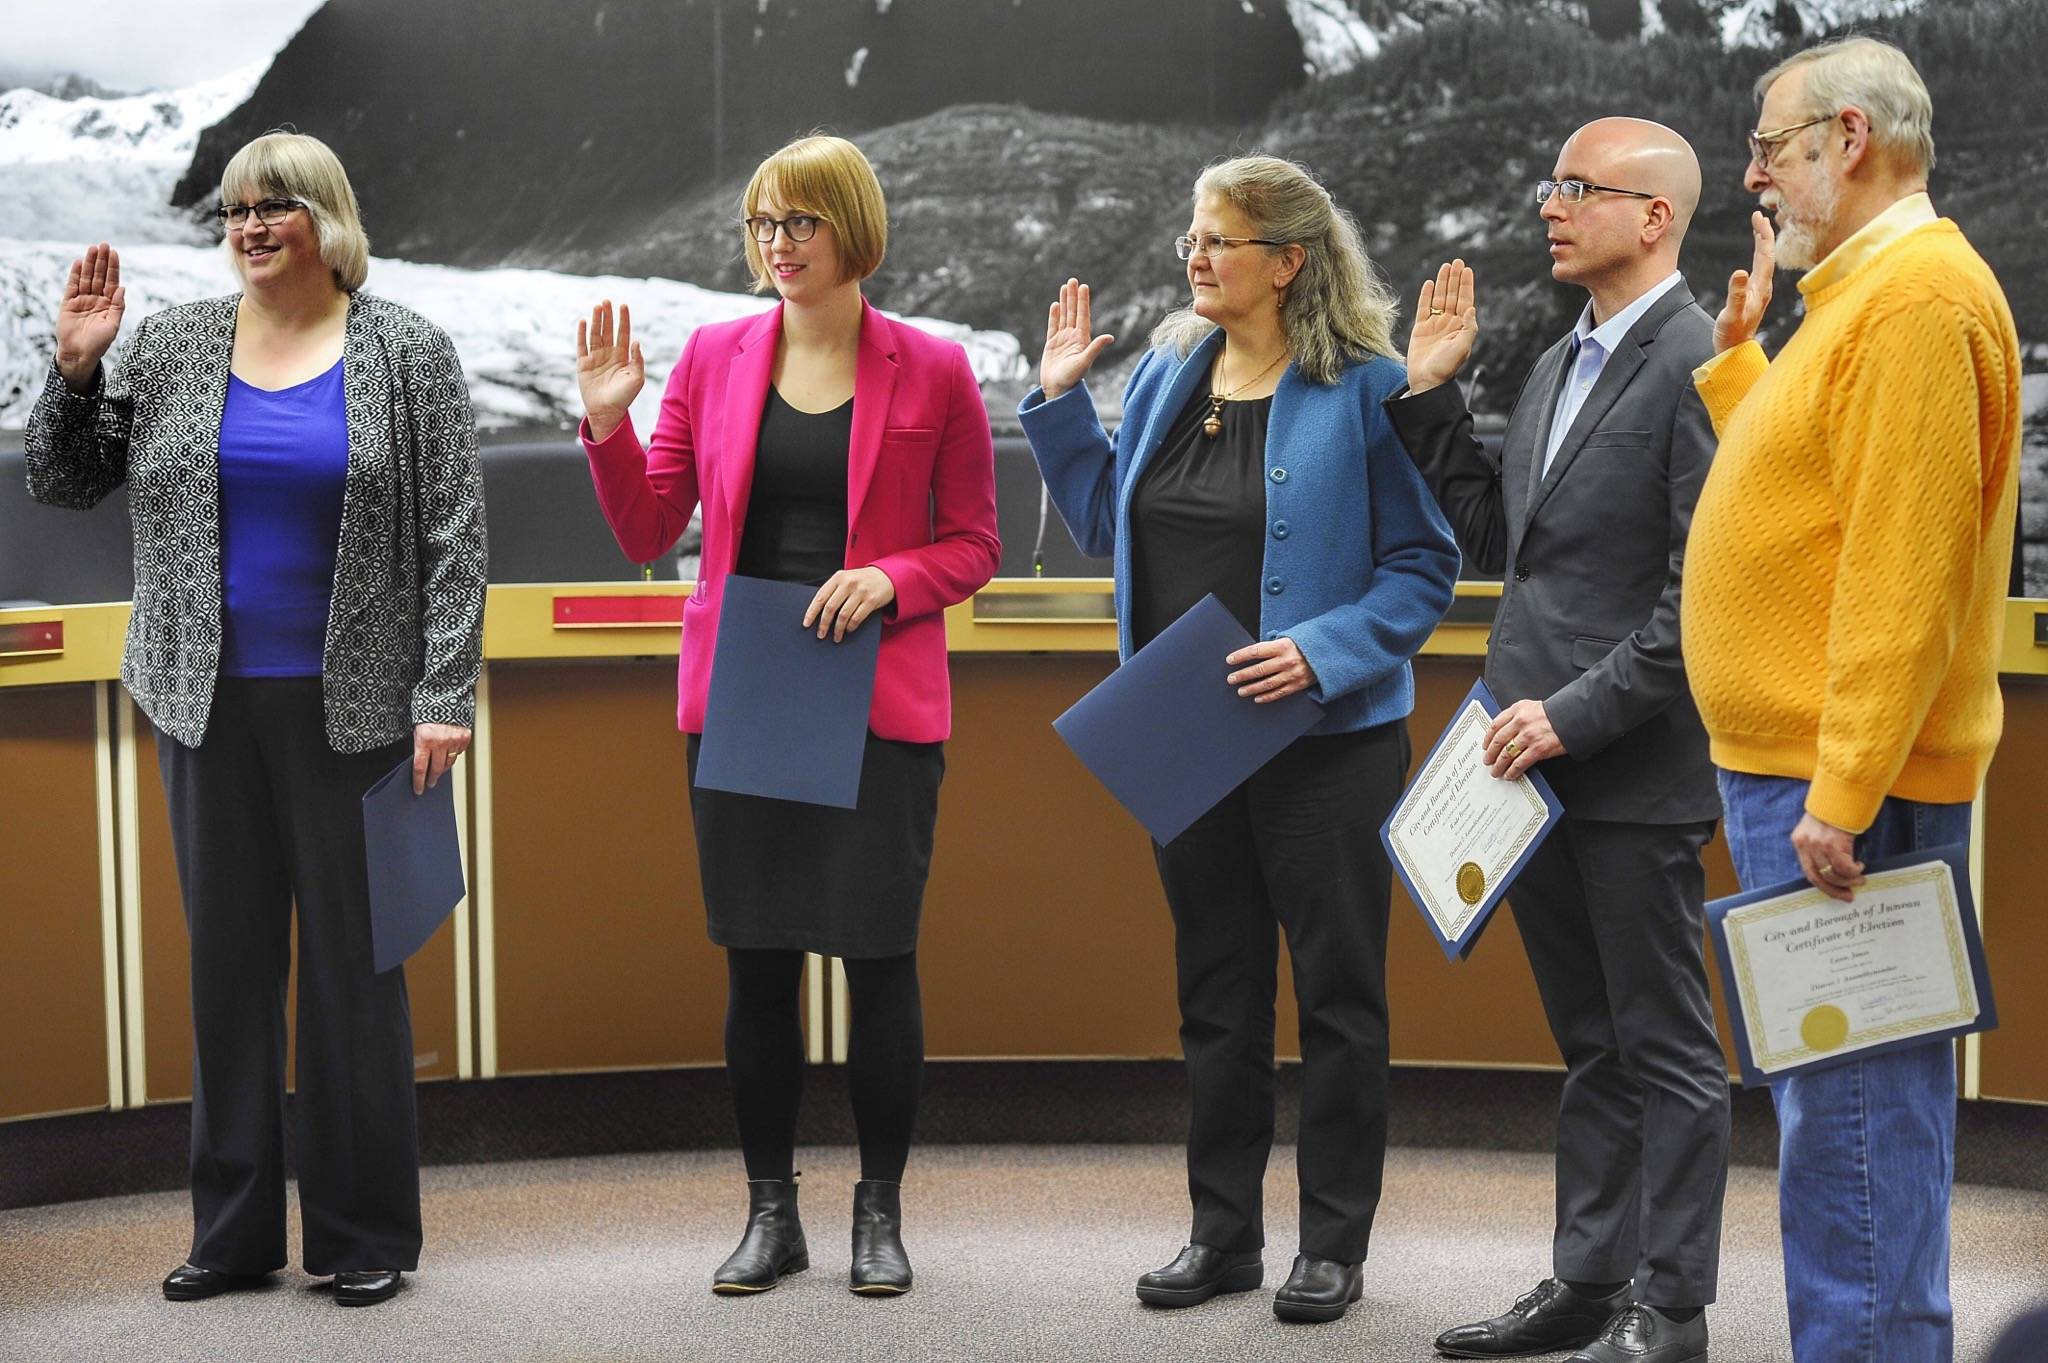 Mayor Beth Weldon, left, Carole Triem, Michelle Bonnet Hale, Wade Bryson and Loren Jones are sworn in to their new positions on the Juneau Assembly on Monday, Oct. 15, 2018. (Michael Penn | Juneau Empire)